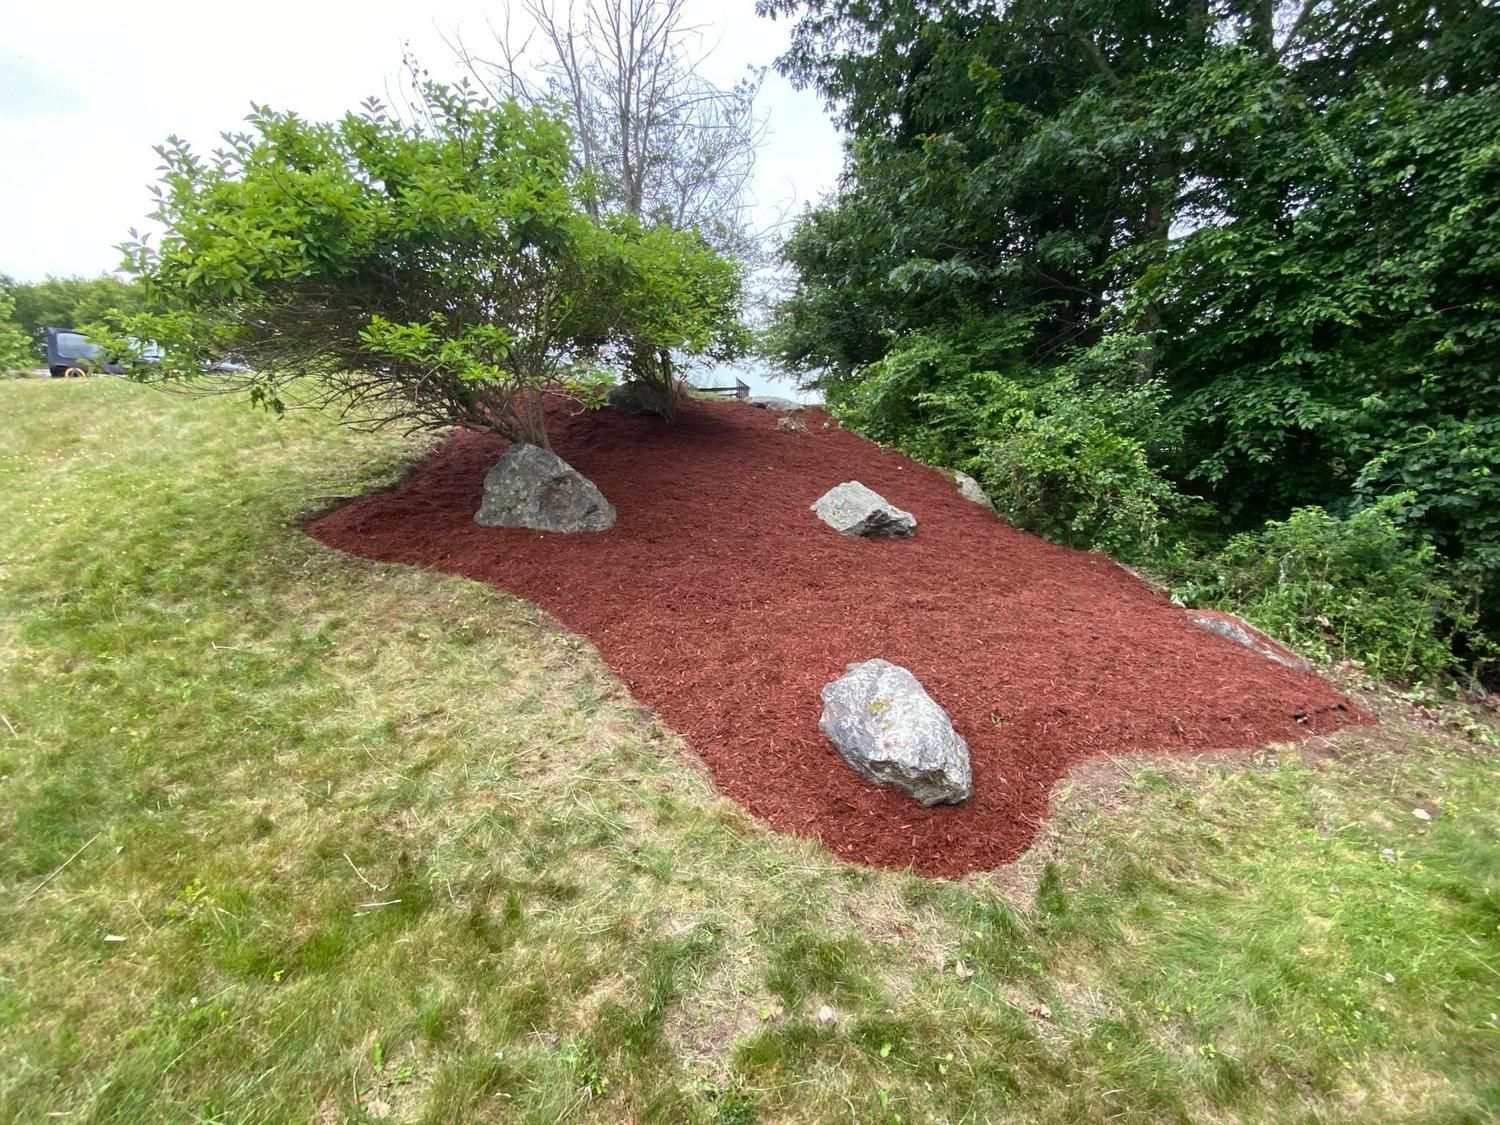 Landscape & Bed Design for Ace Landscaping in Trumbull, CT